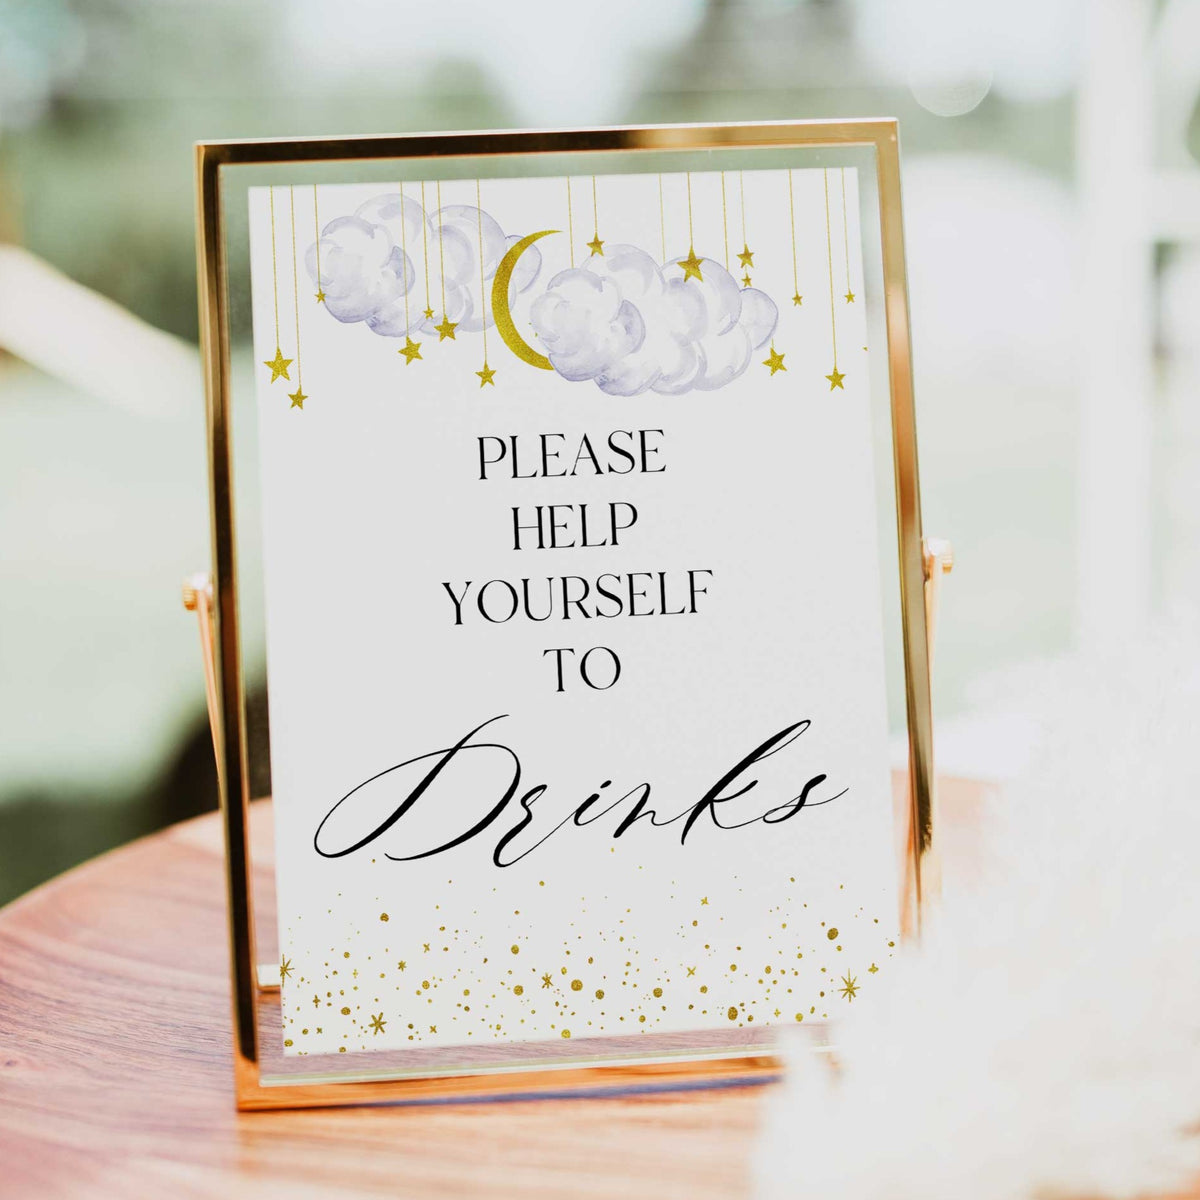 Fully editable and printable baby shower drinks table sign with a twinkle little star design. Perfect for a twinkle little star baby shower themed party